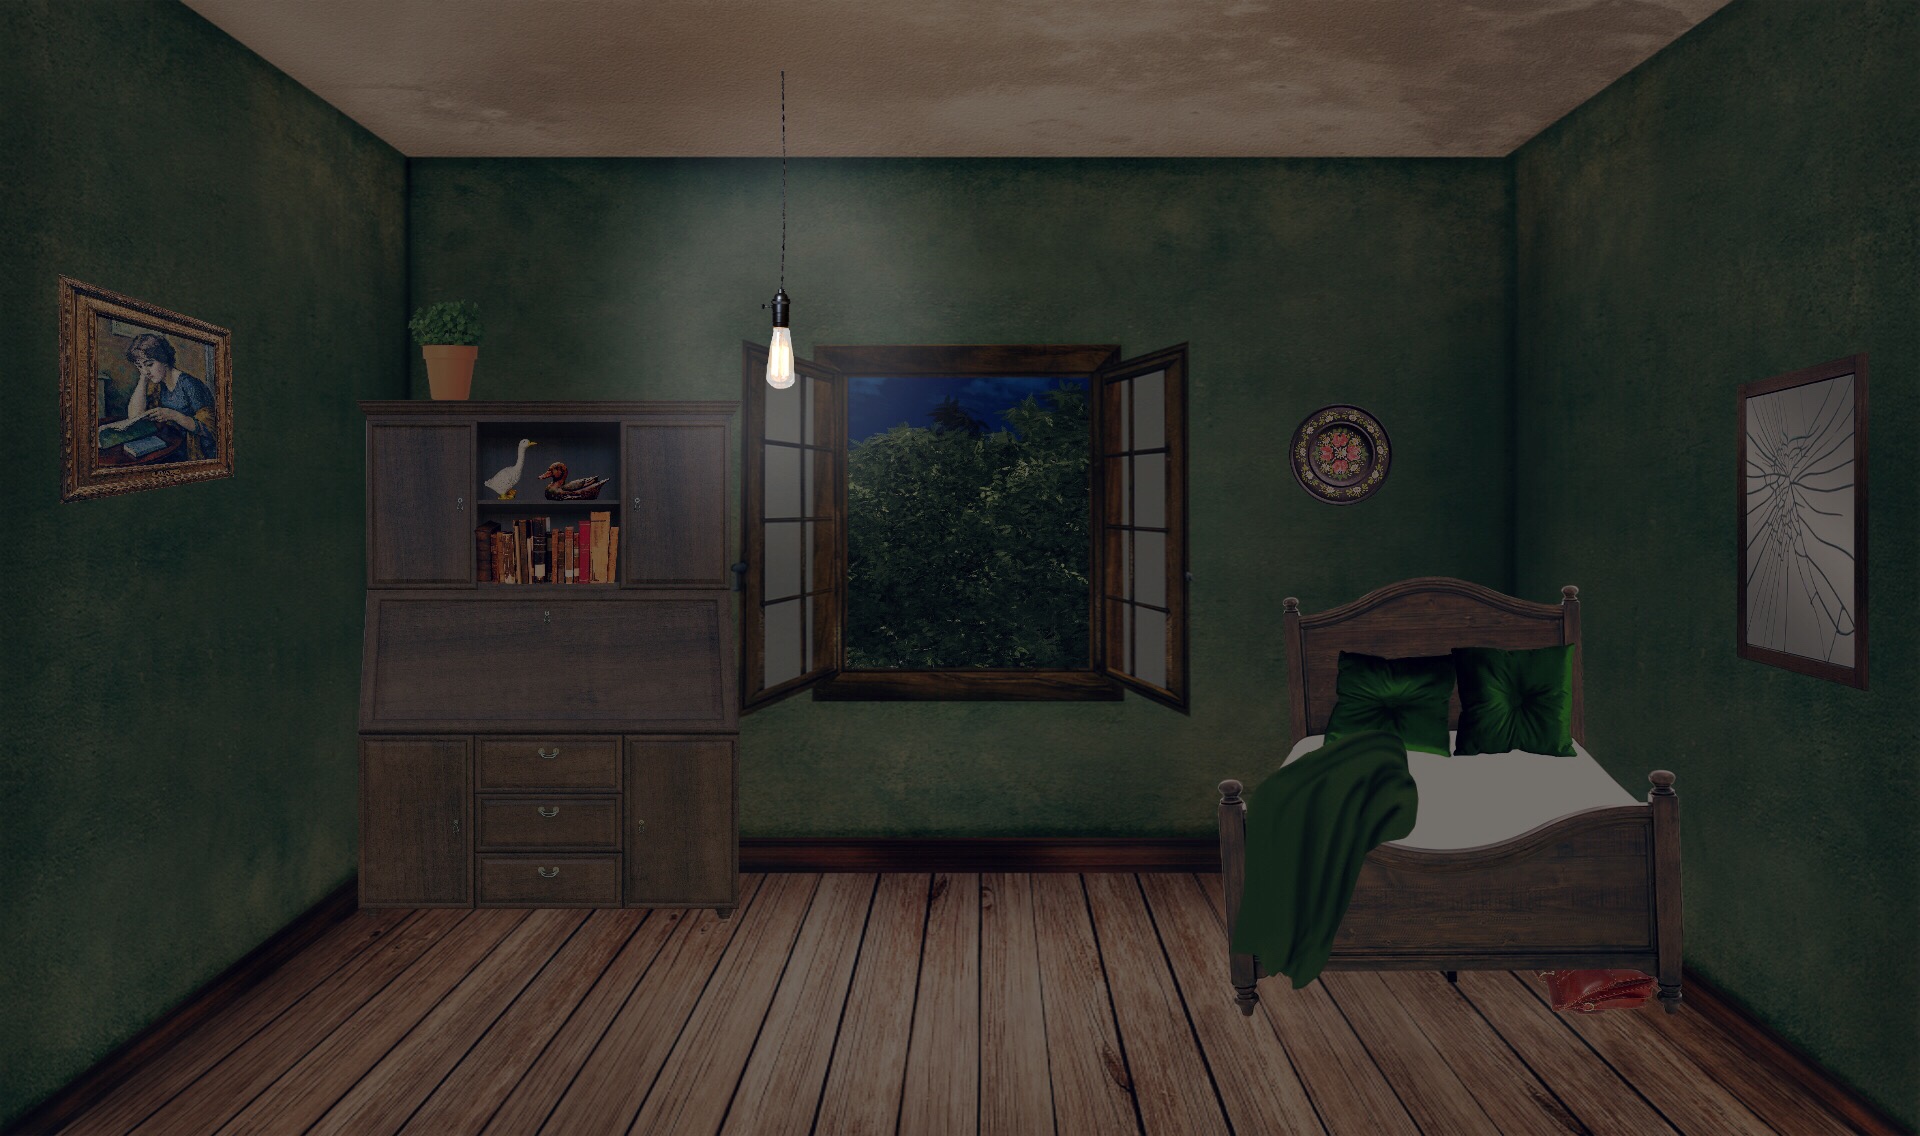 INT. HOME ALONE BEDROOM GREEN 2 – NIGHT